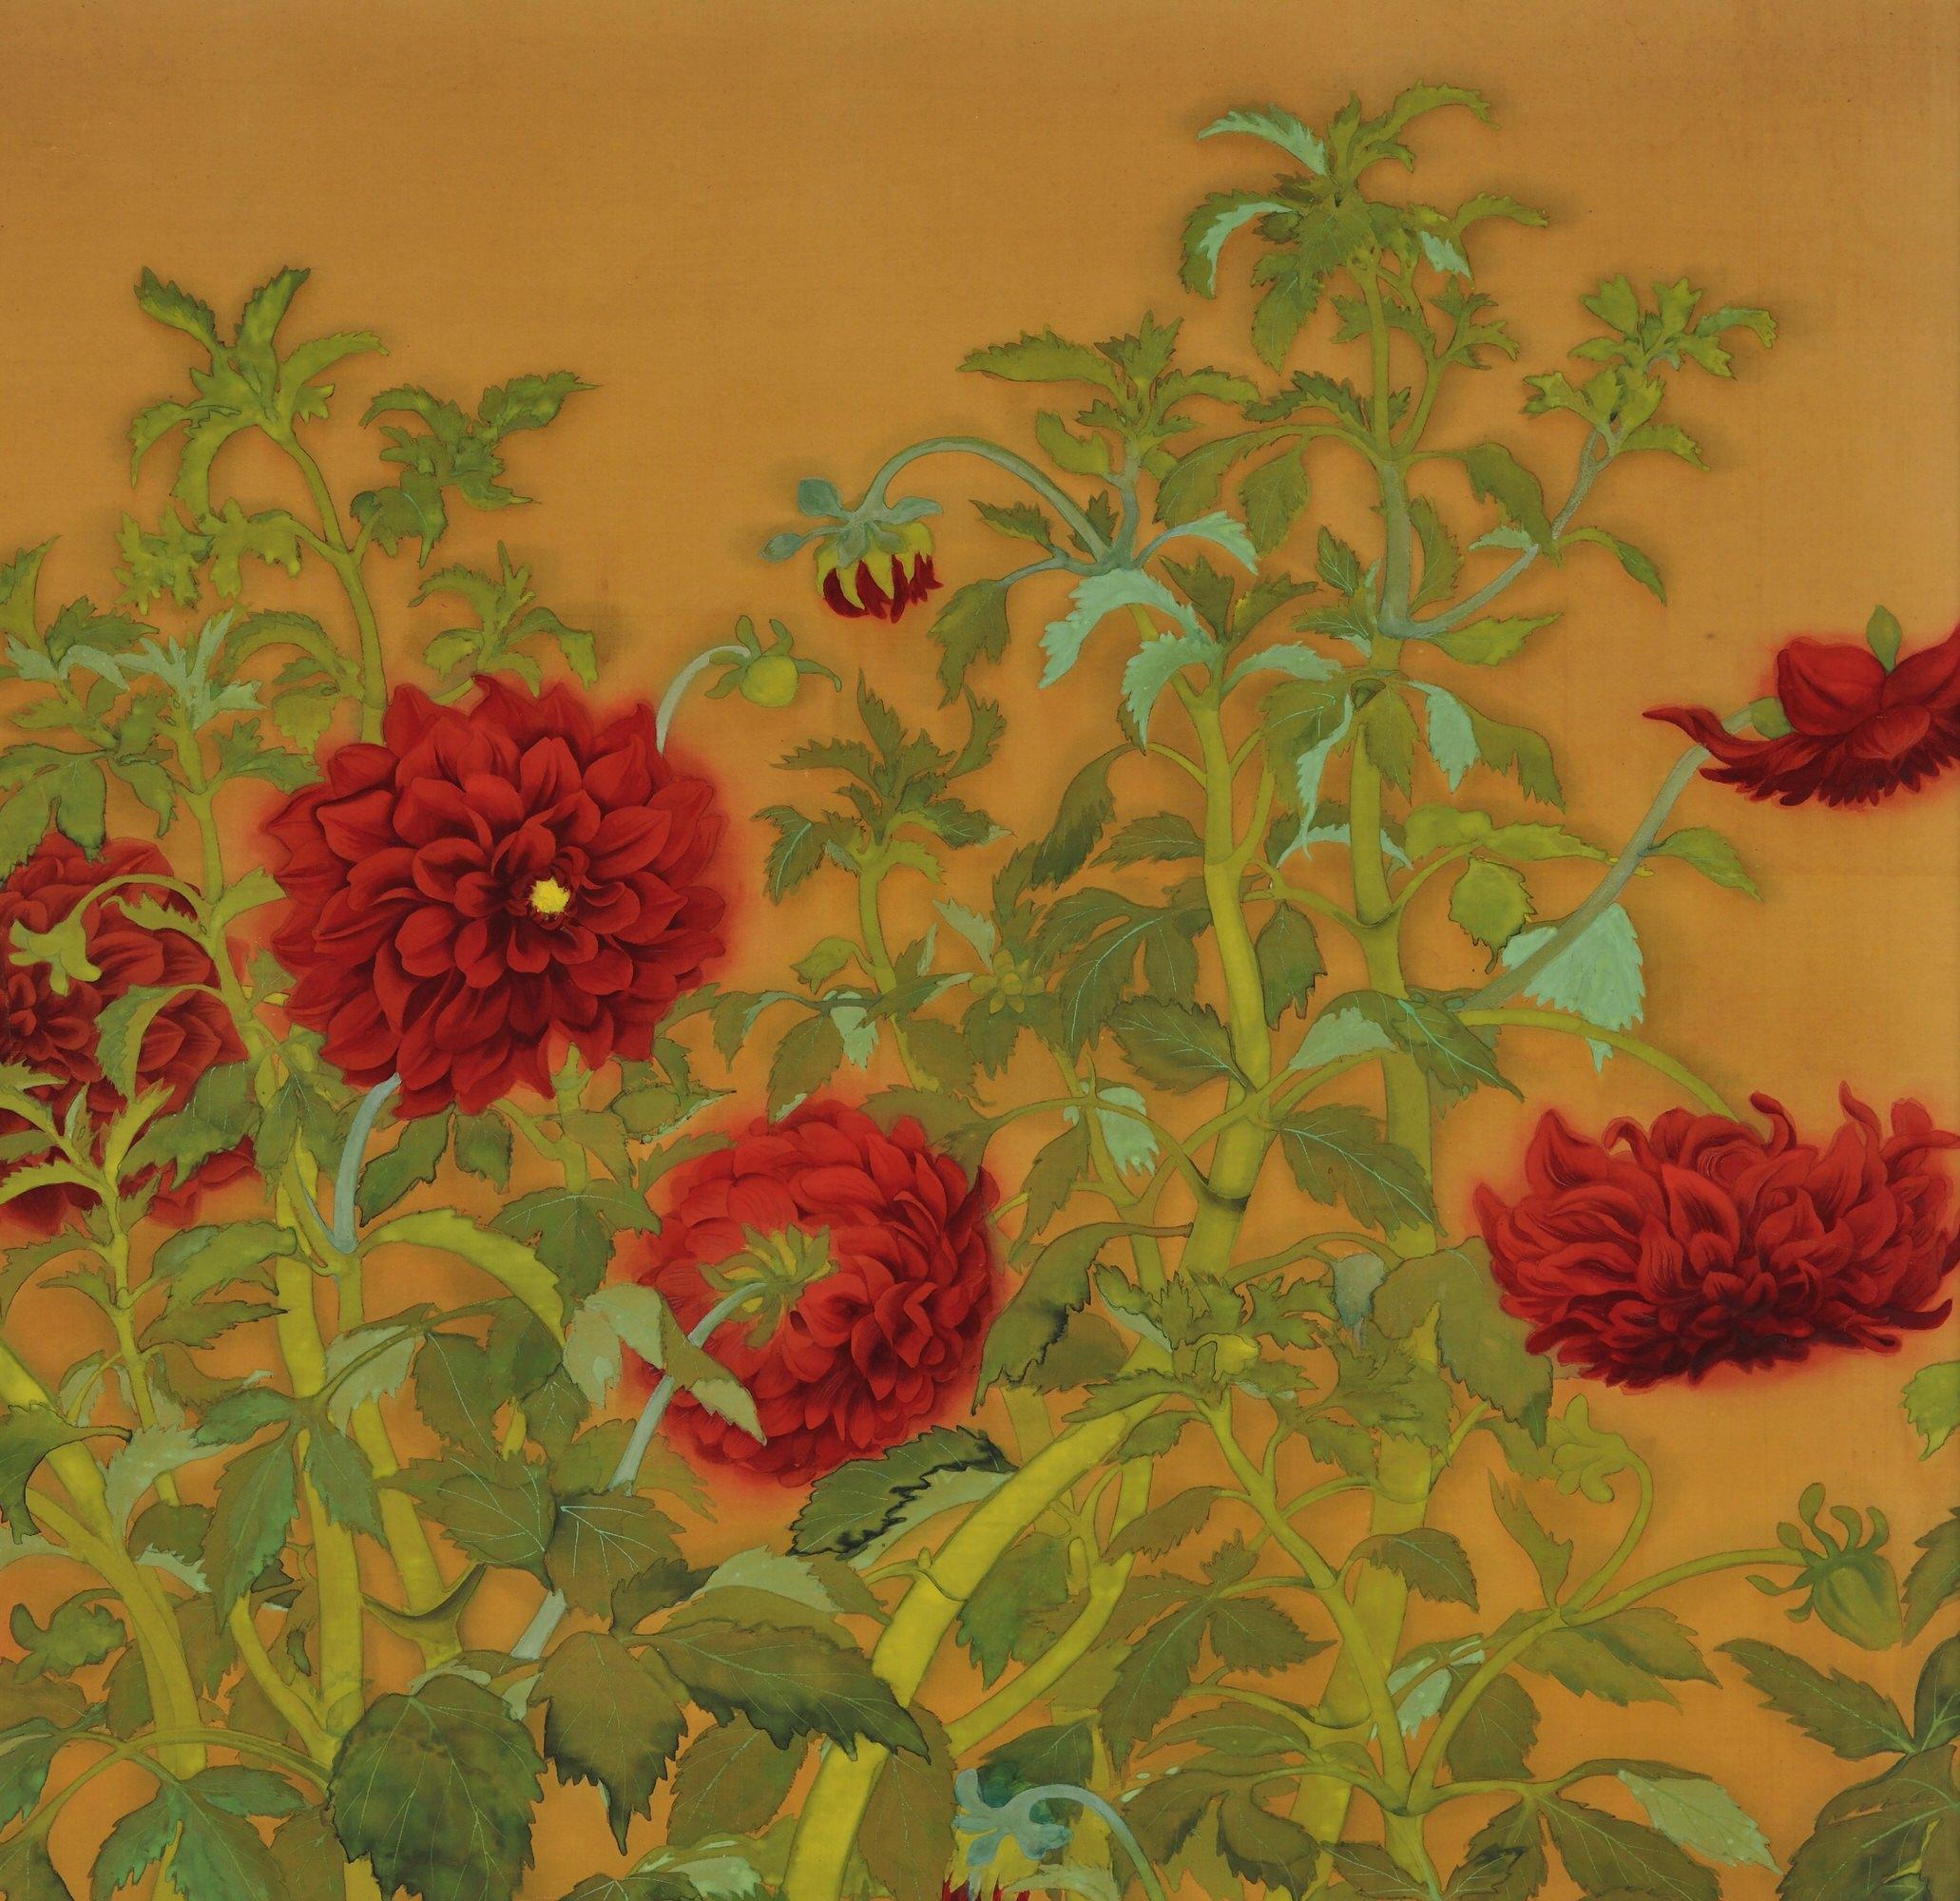 Tanaka Tessen (b.1890)

Dahlias and Roosters

Taisho period, circa 1920

Framed painting. Mineral pigments and ink on silk.

Dimensions (framed):

H. 159 cm x W. 97 cm x D. 2.5 cm (62.5” x 38” x 1”)

An ornate and complex composition in which the